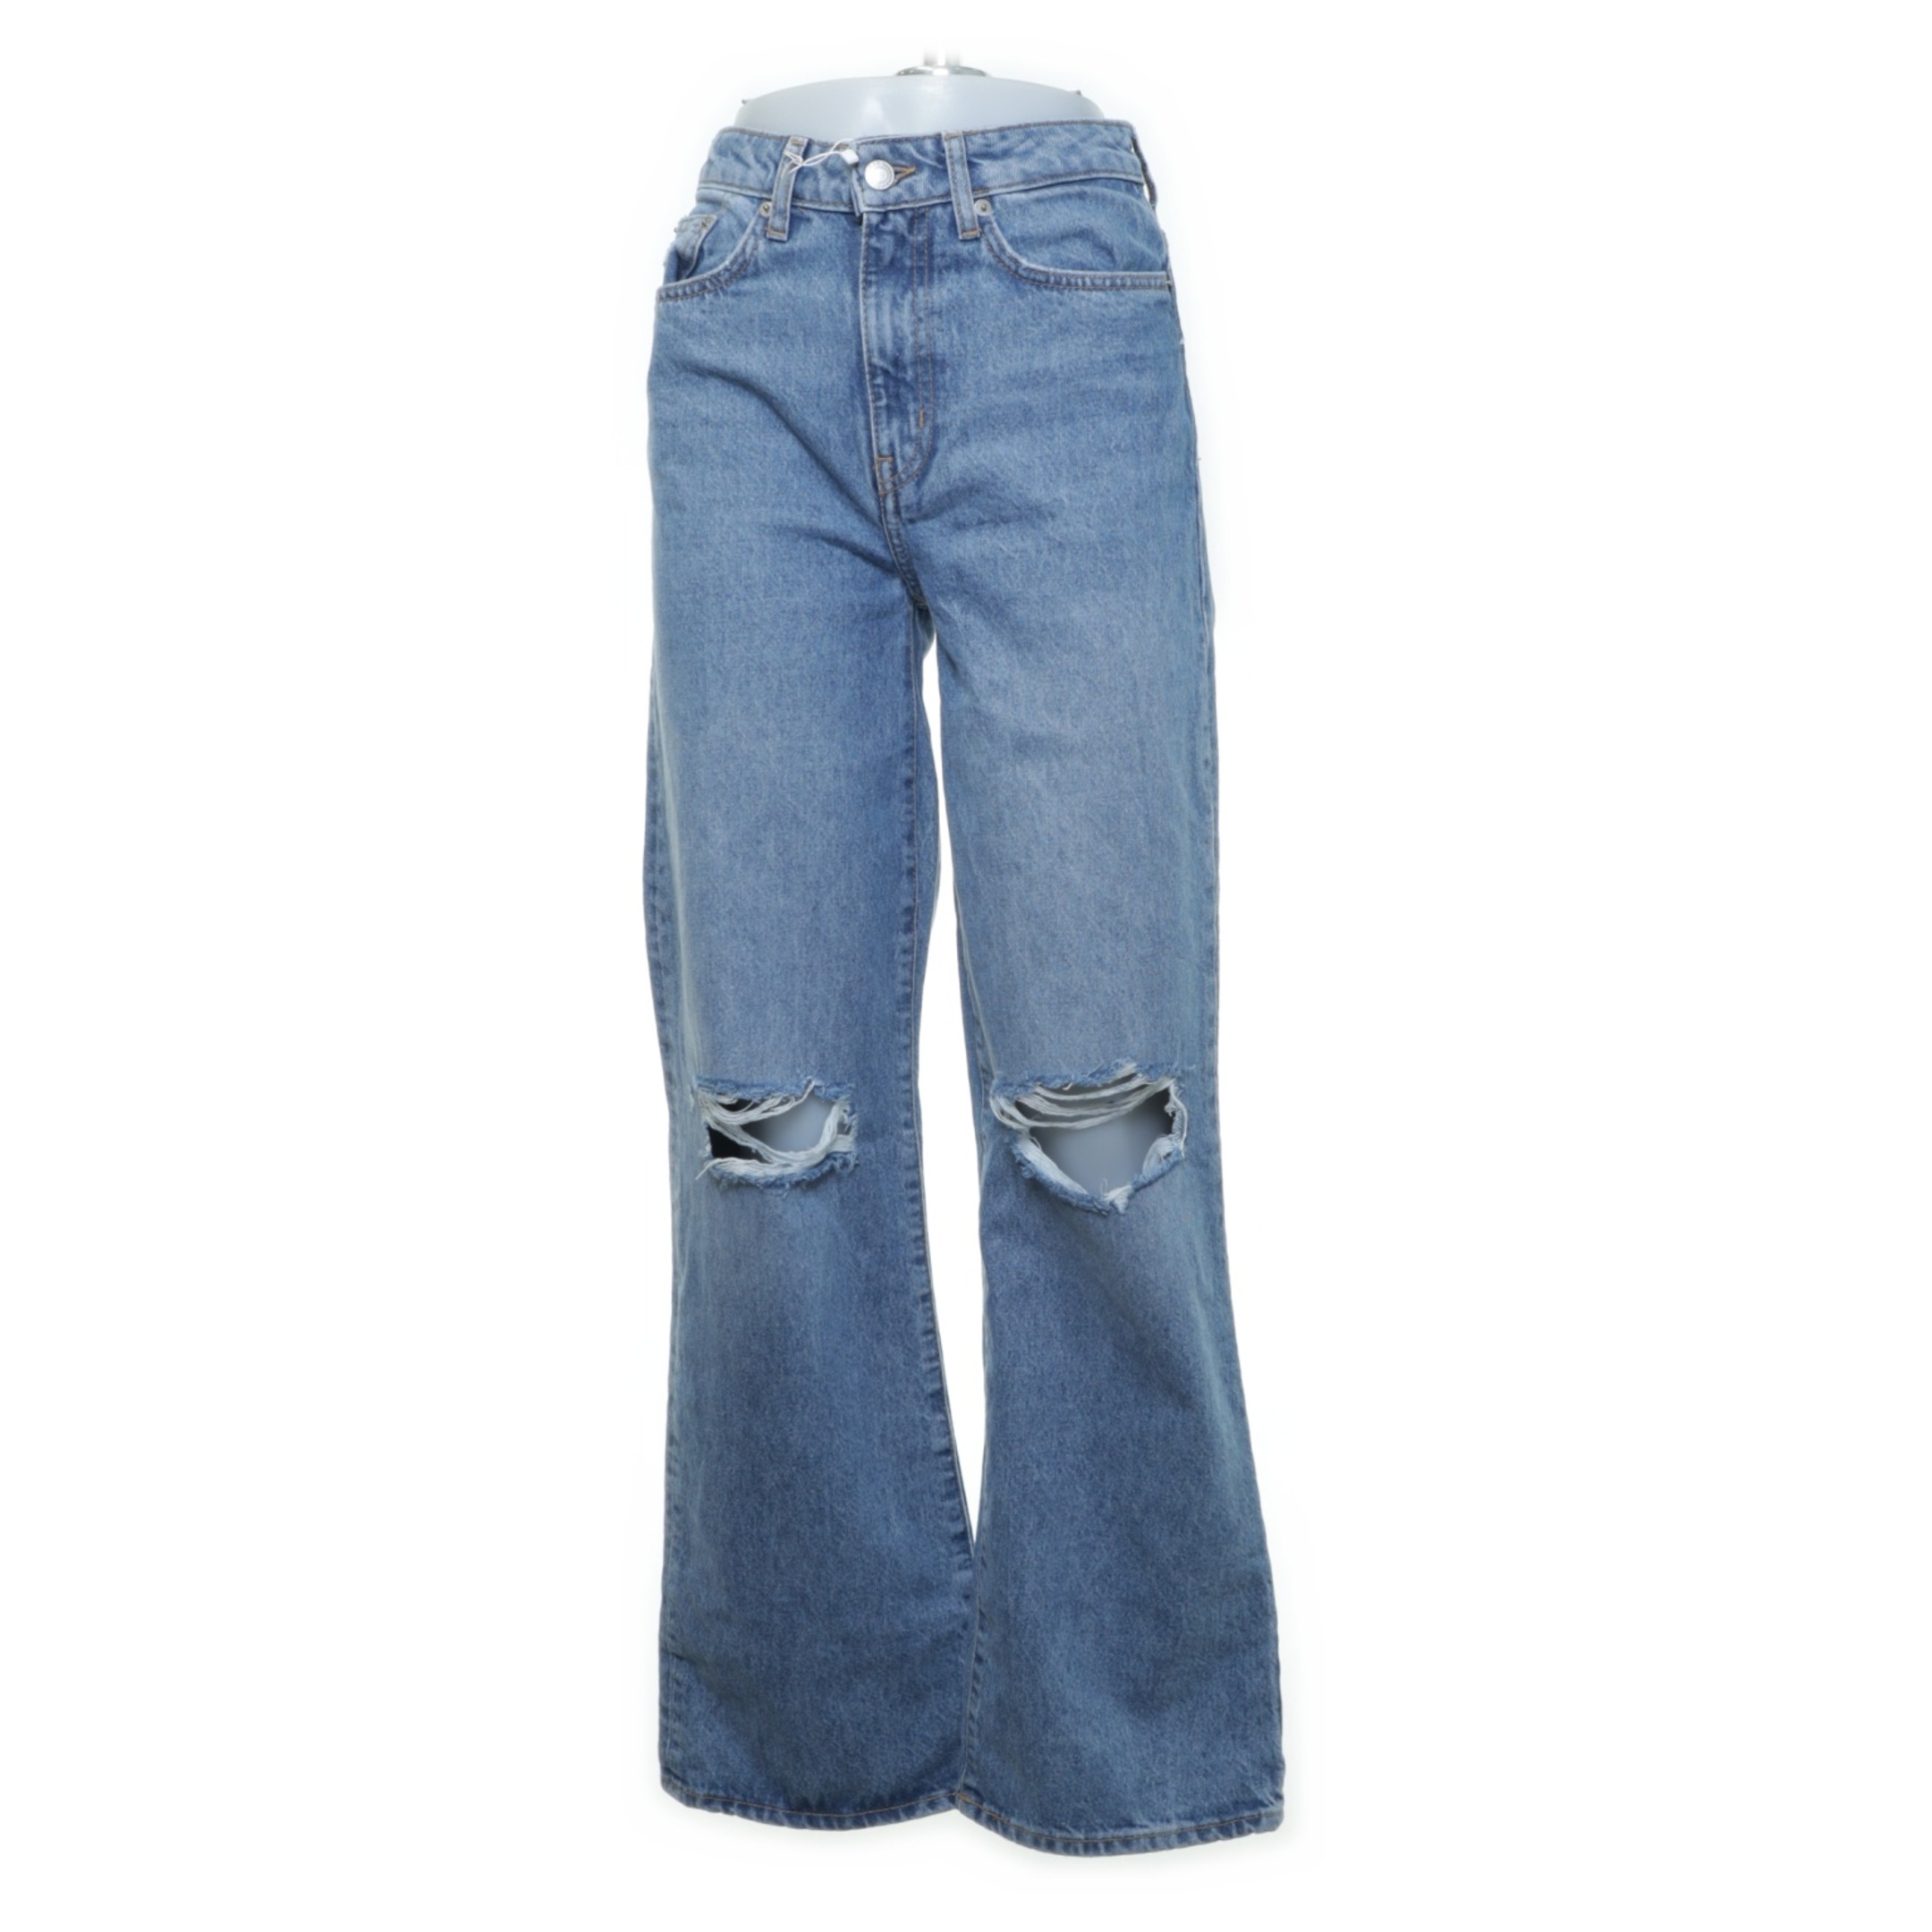 Lager 157 Jeans